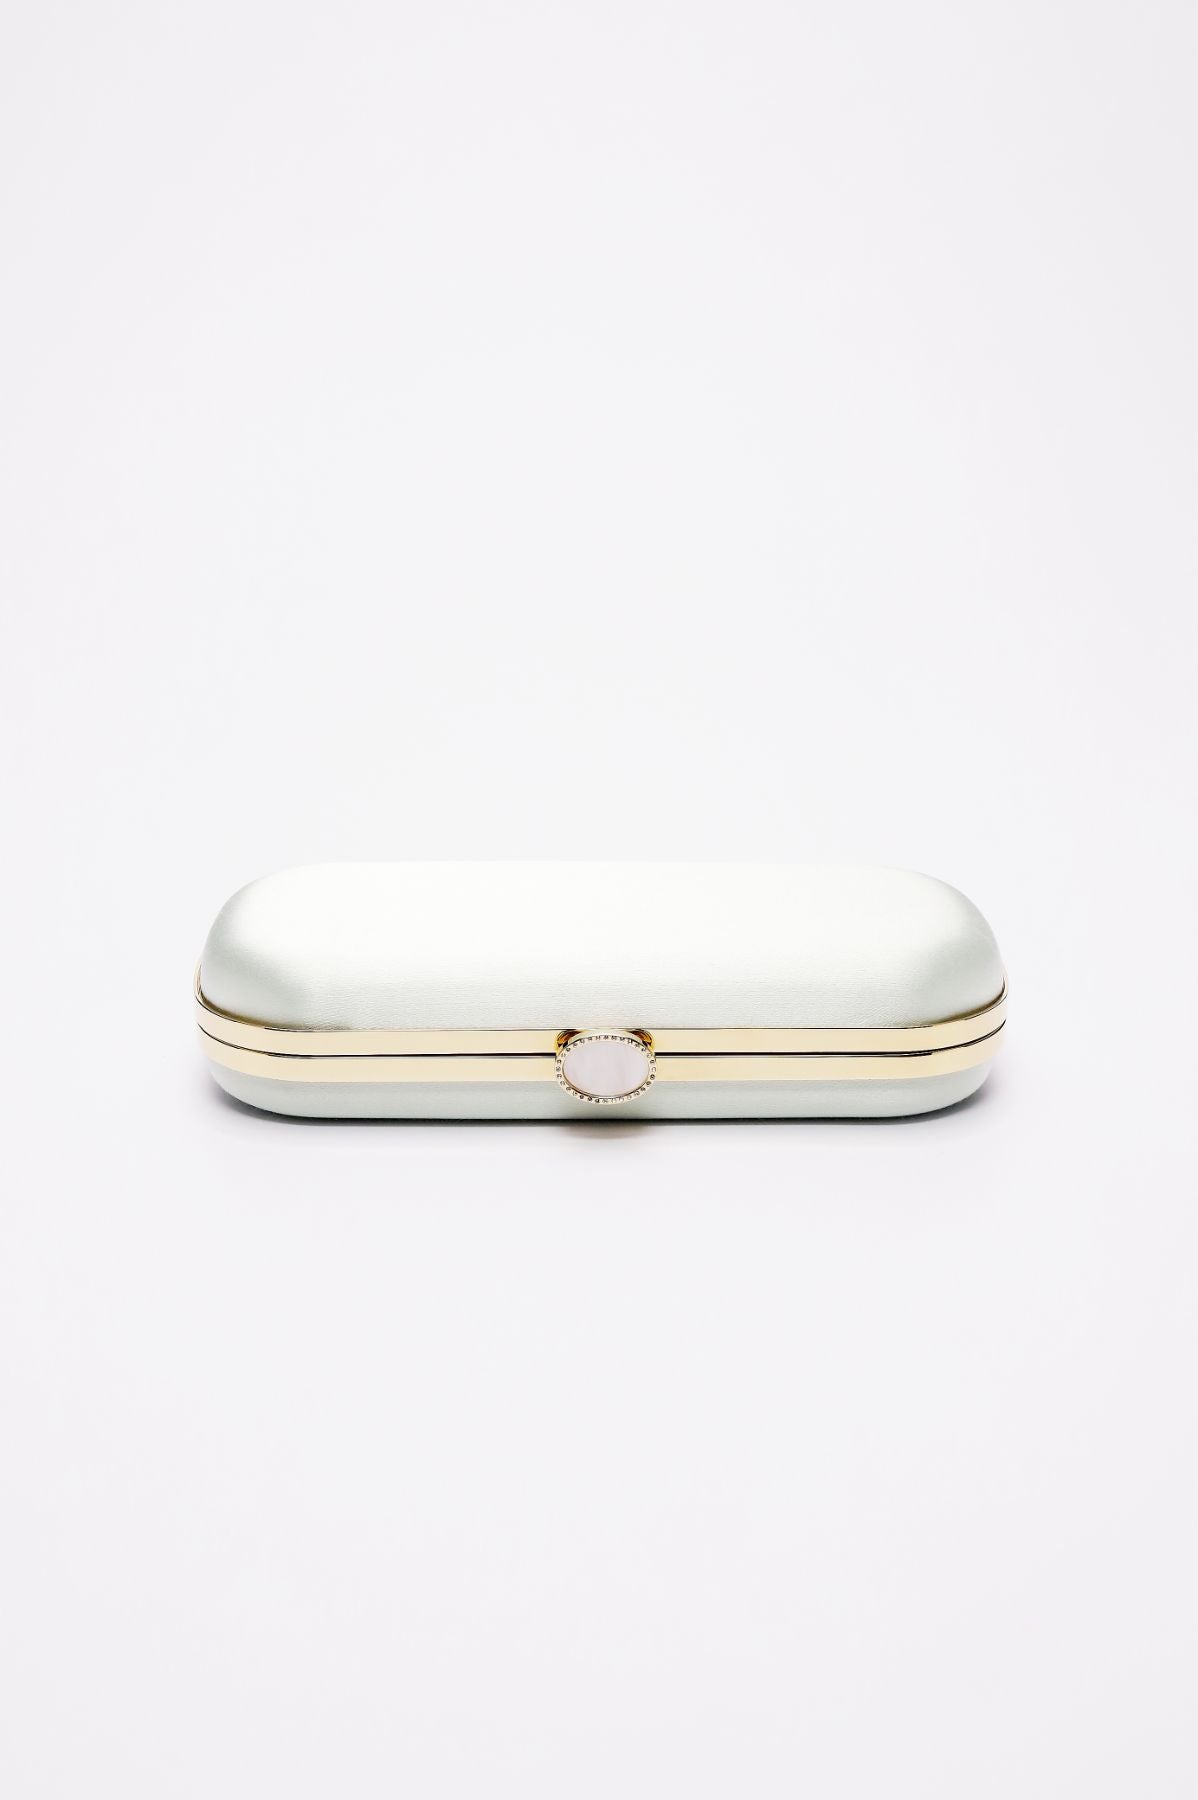 A white eyeglass case with a gold-toned clasp, centered on a plain background, reminiscent of the Bella Clutch Sage Green Satin Petitie from The Bella Rosa Collection.